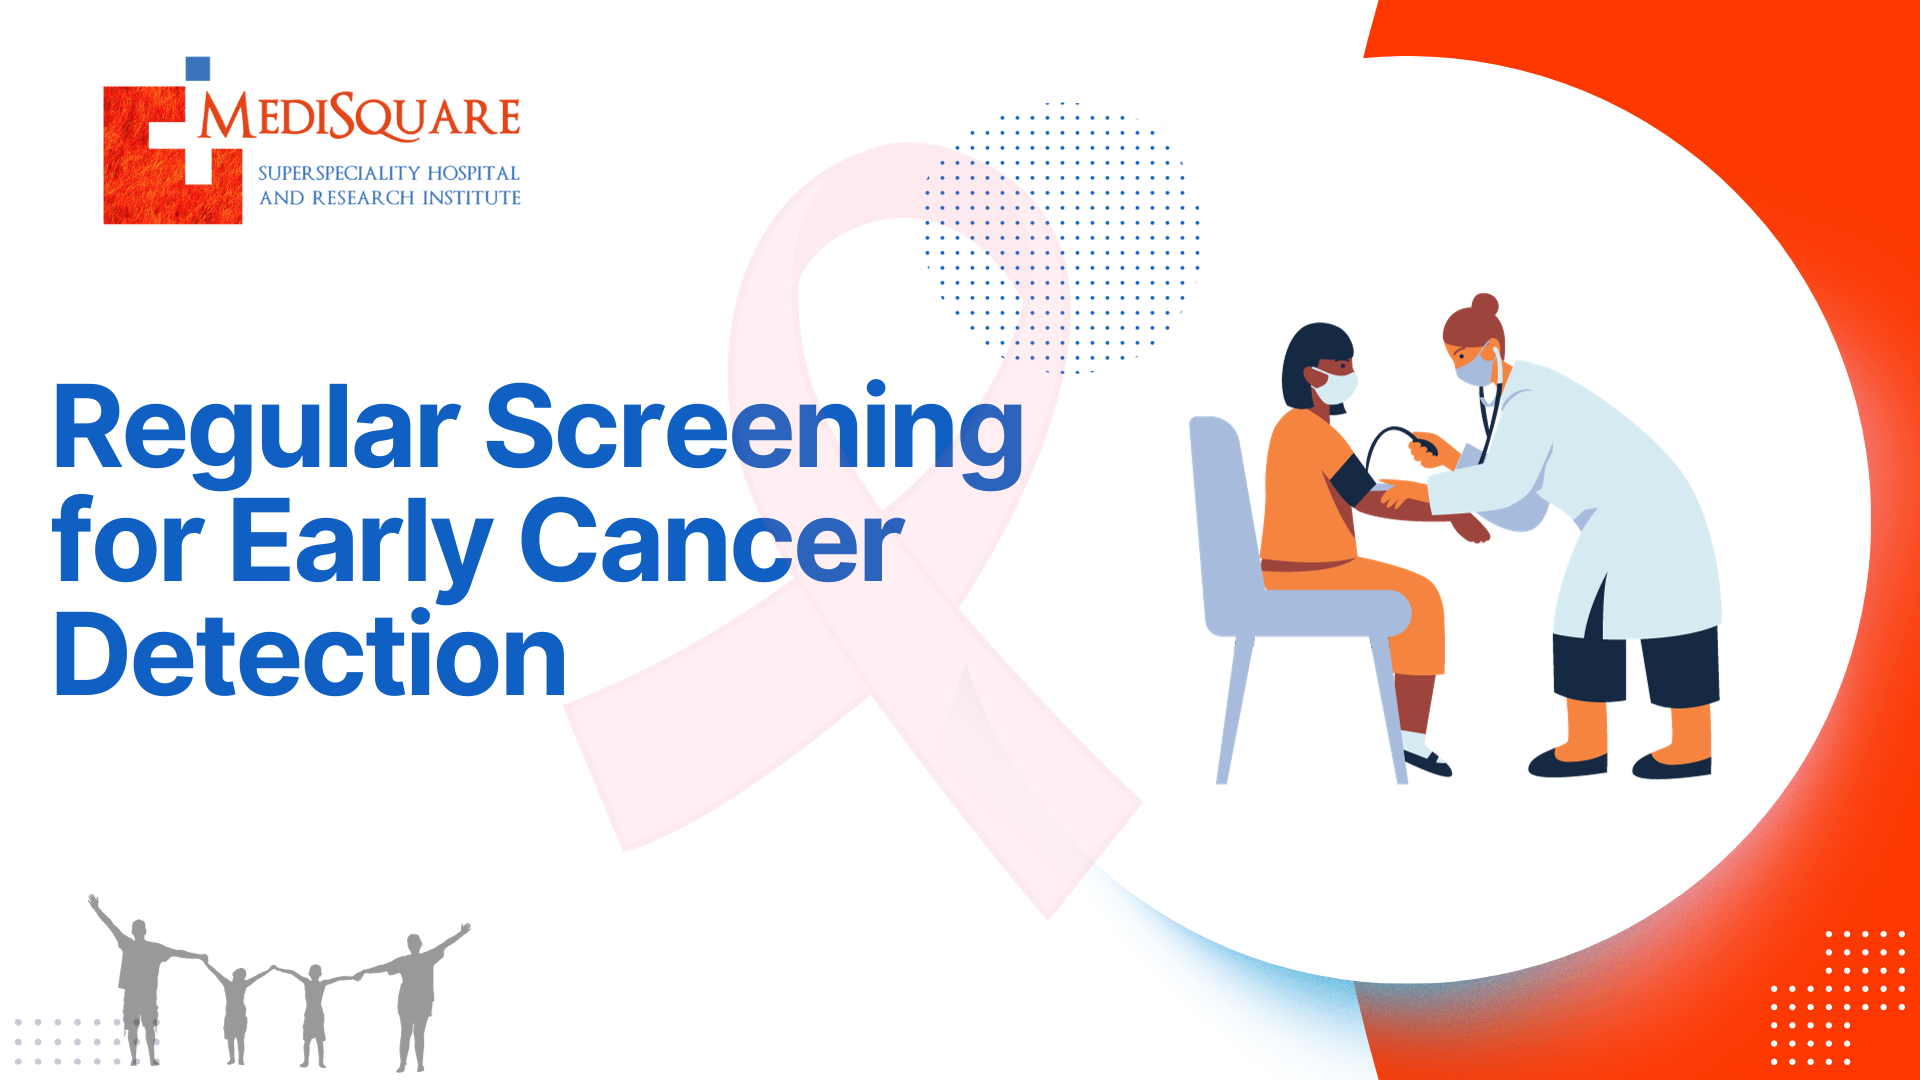 Best Cancer Hospital in Ahmedabad